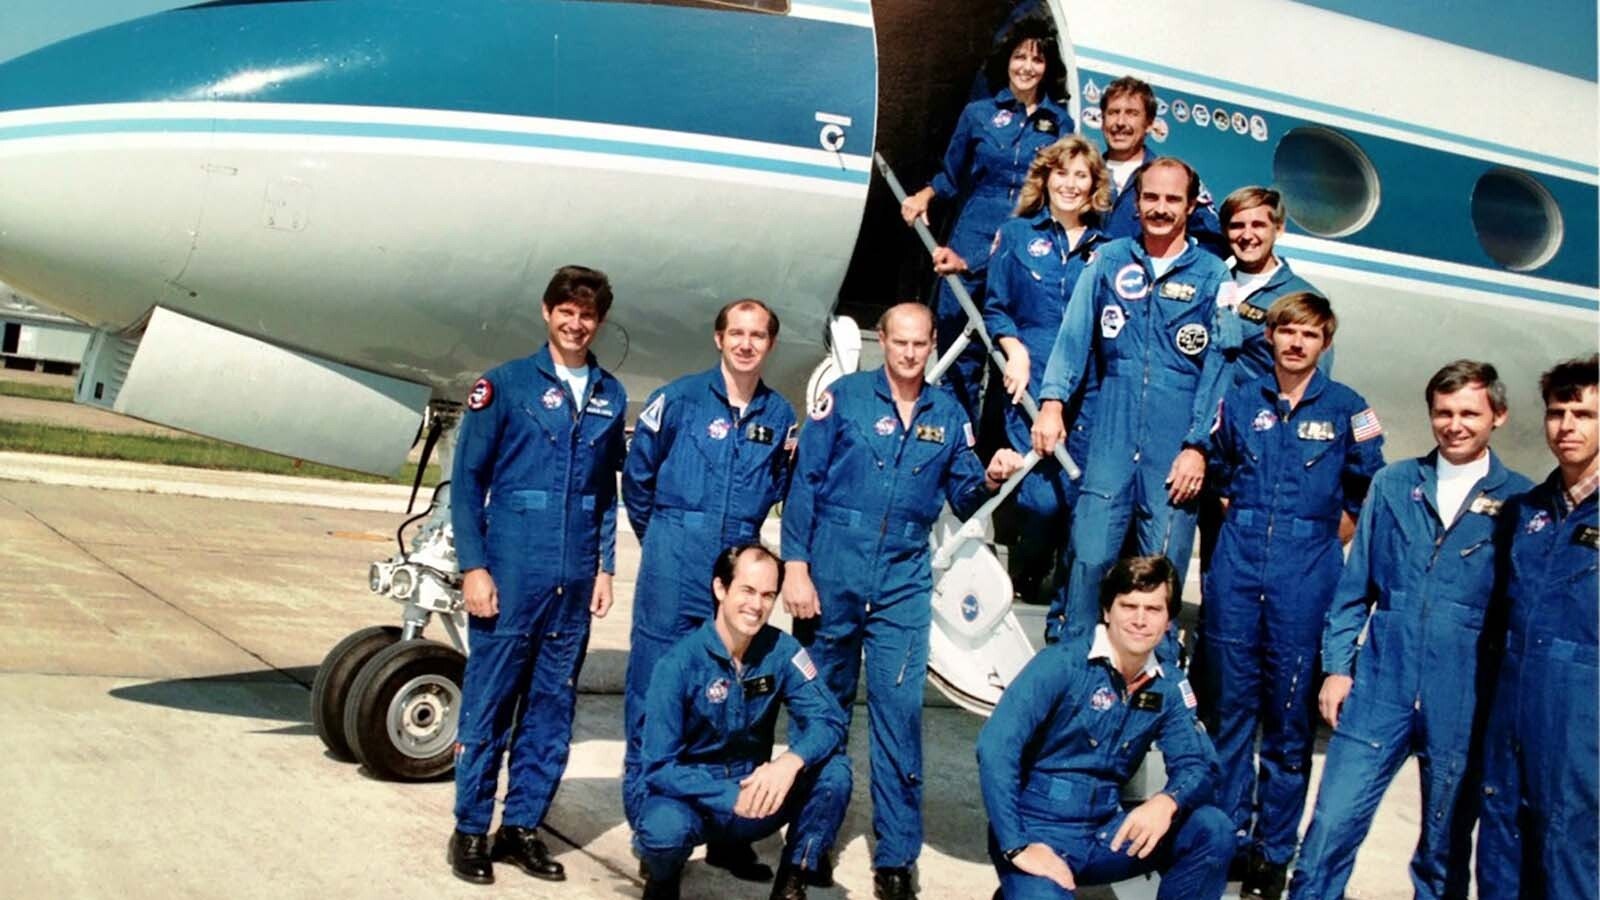 Crew from the 1985 space shuttle program. Larry LaRose is standing at the bottom of the stairs on the first step with some members of the STA Program flight crew.